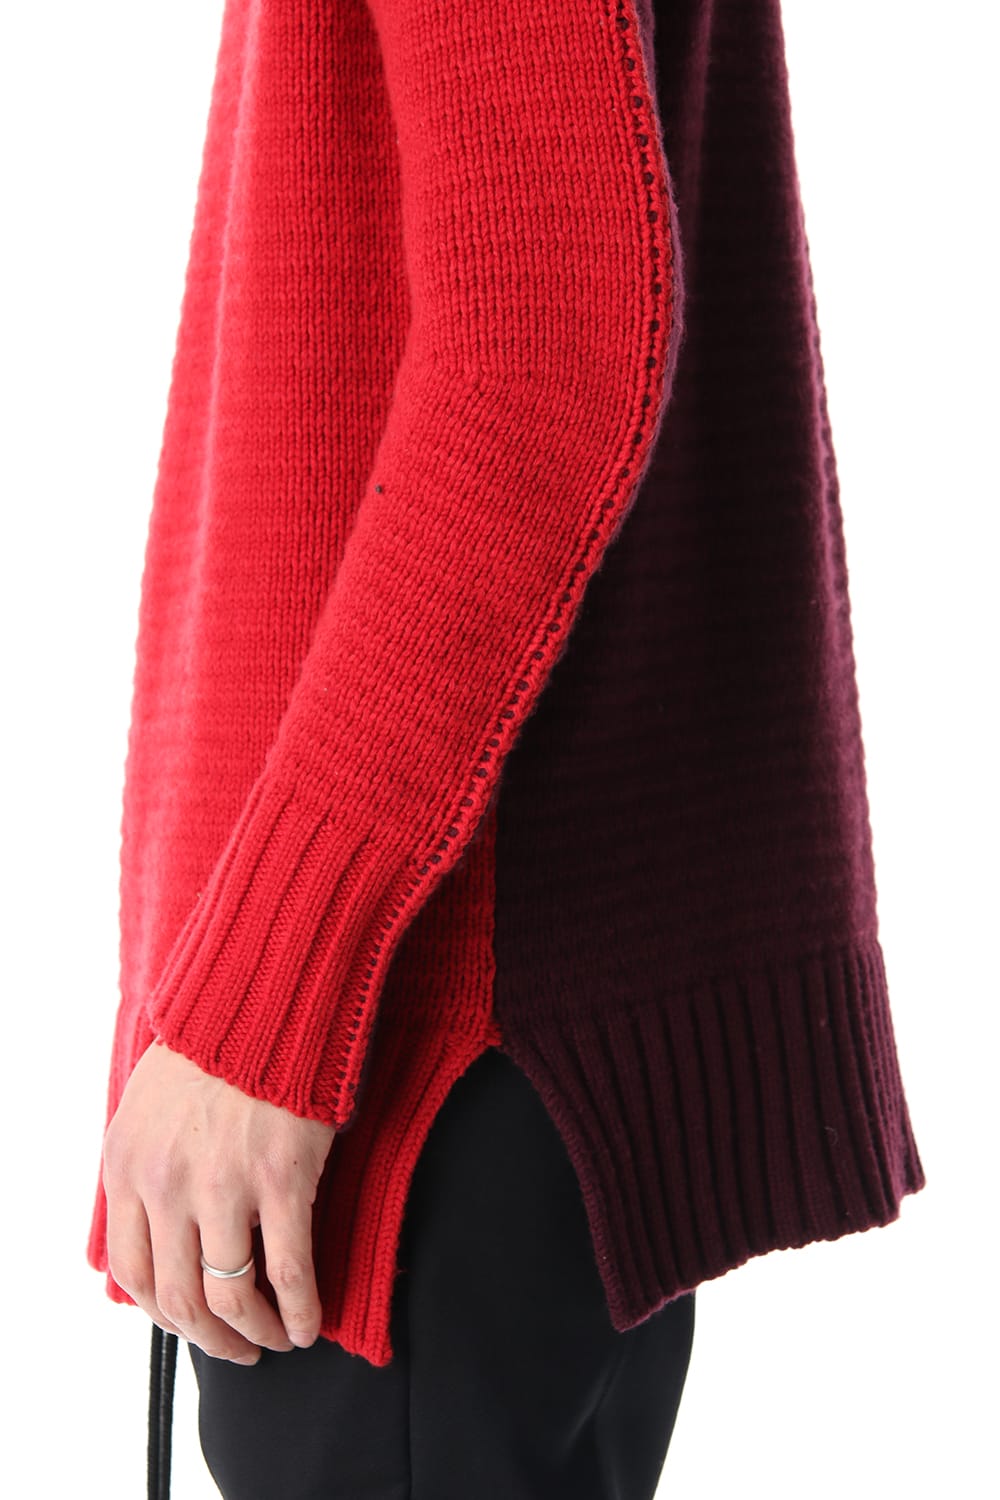 doubleface-knit-jersey-rb-239-red-burgundy | ダブルフェイス ニット 